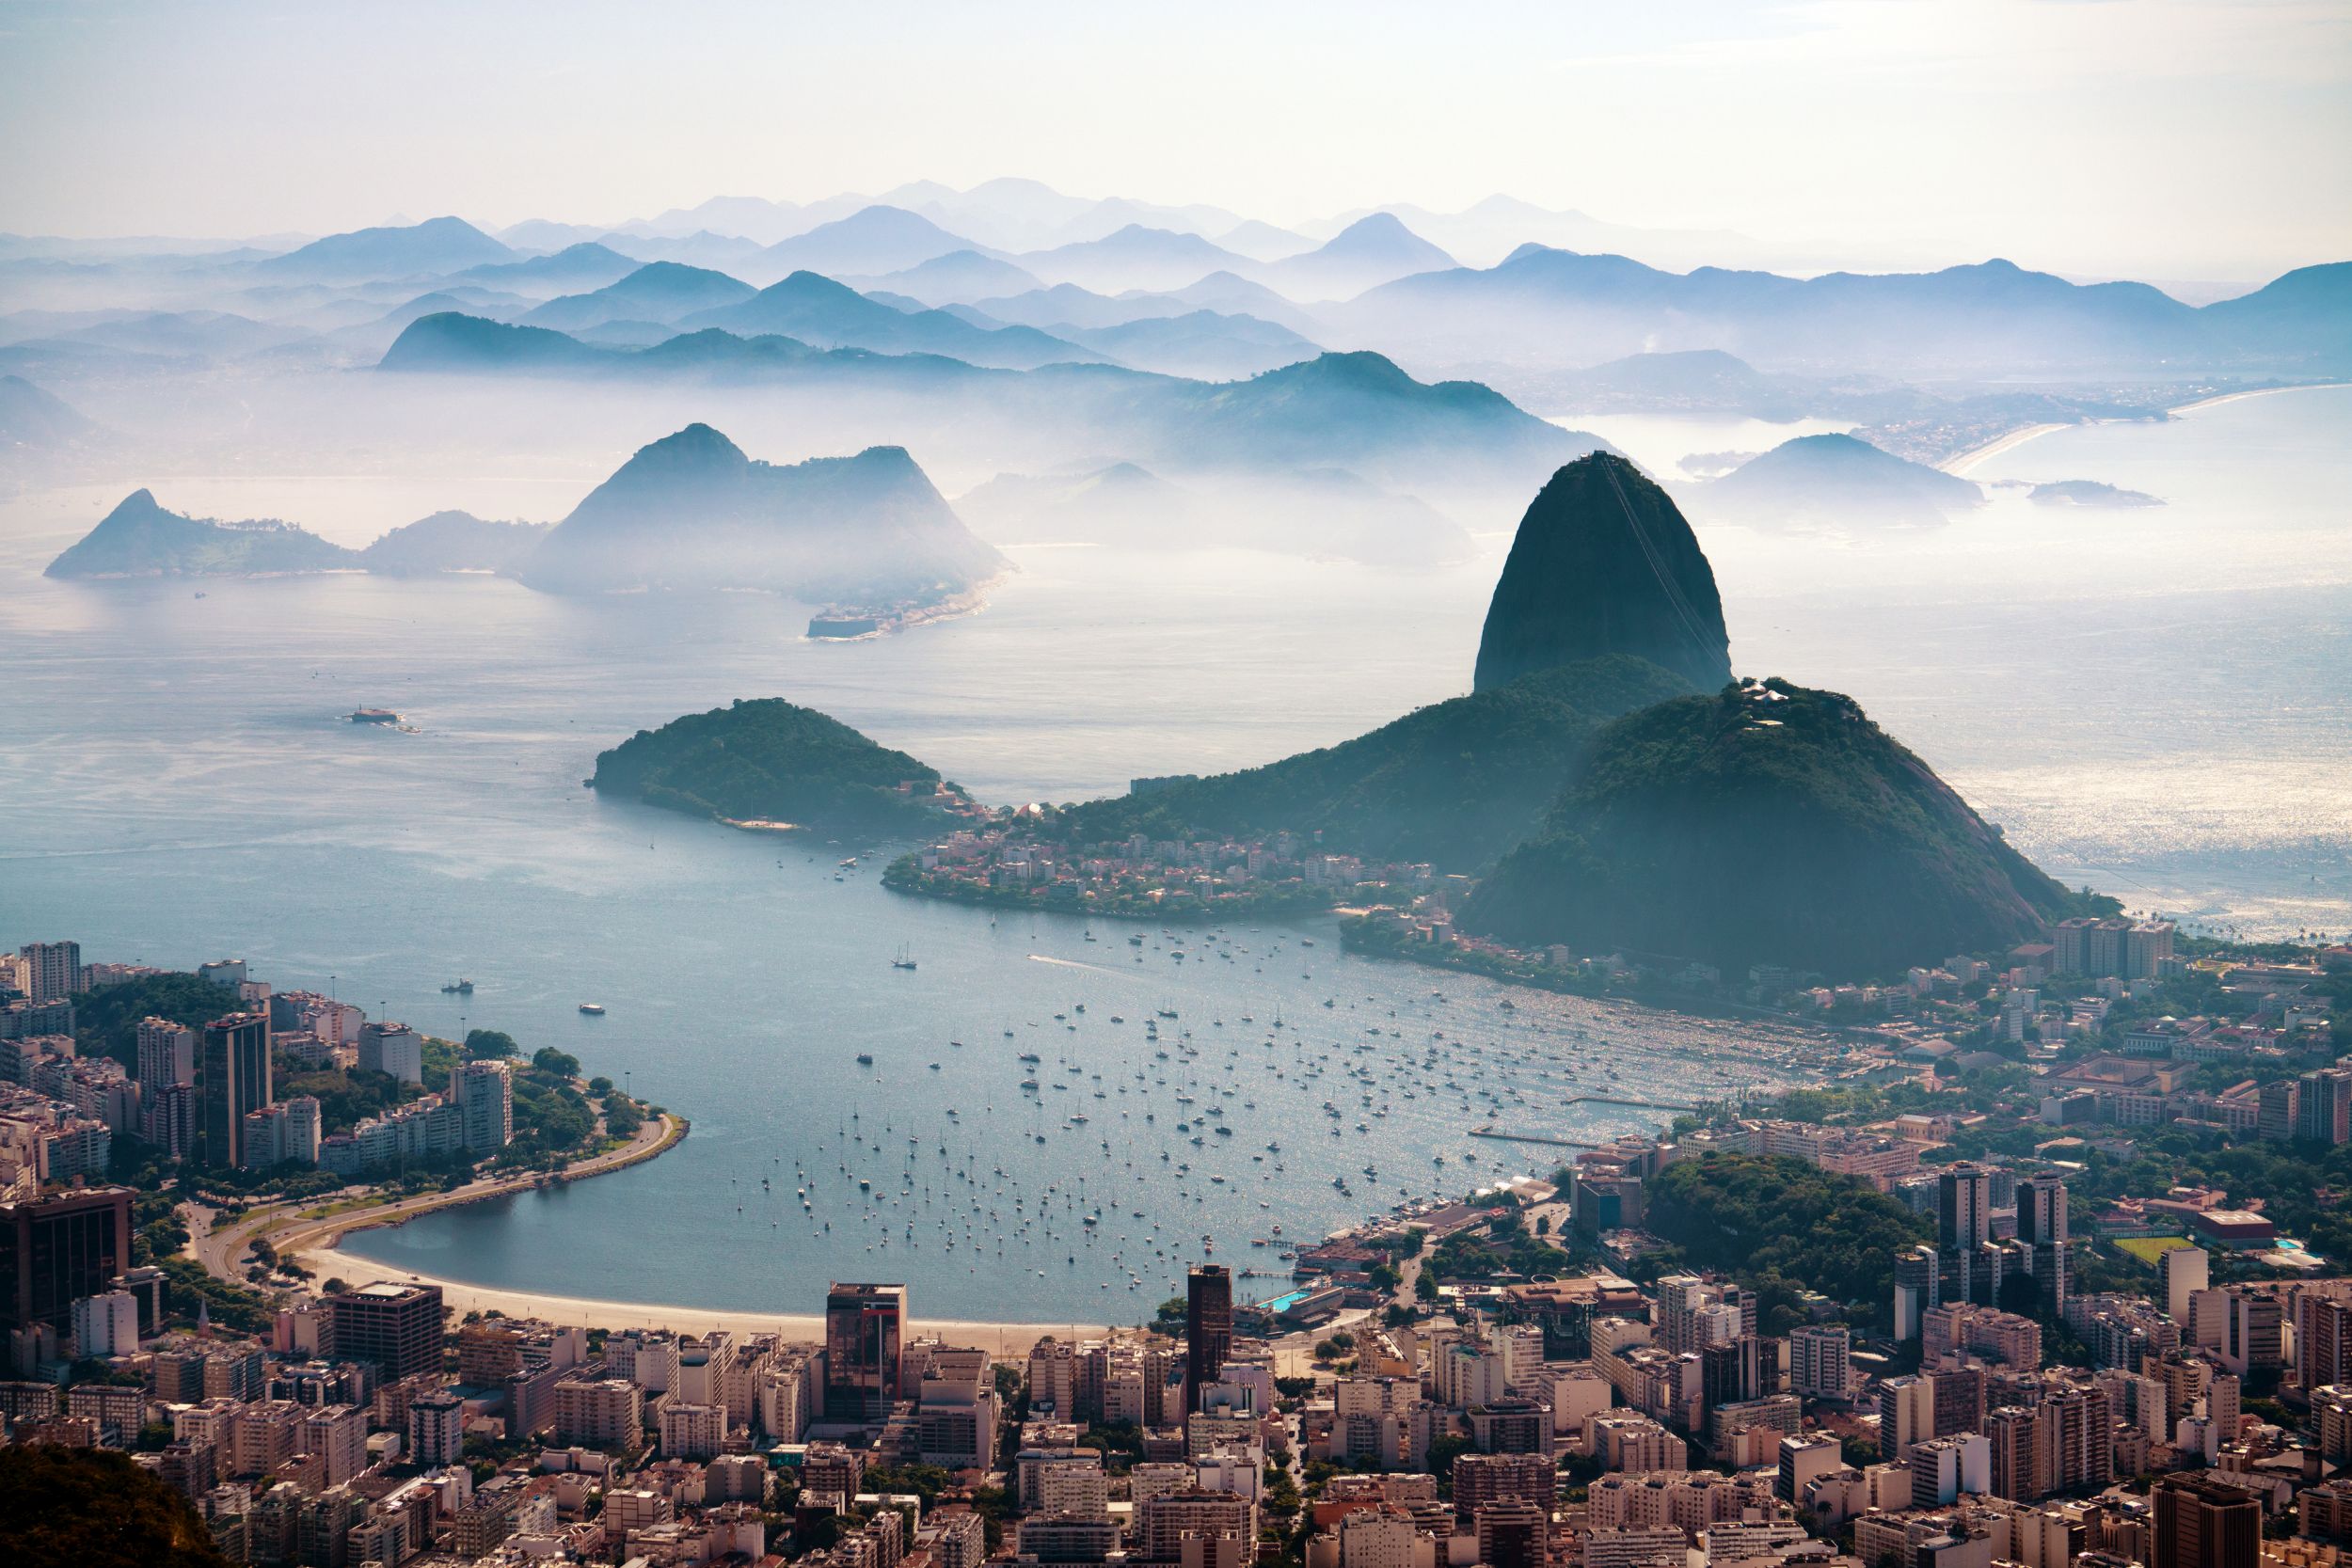 The Sugarloaf mountain in morning mist and Botafogo bay (Thinkstock/PA)